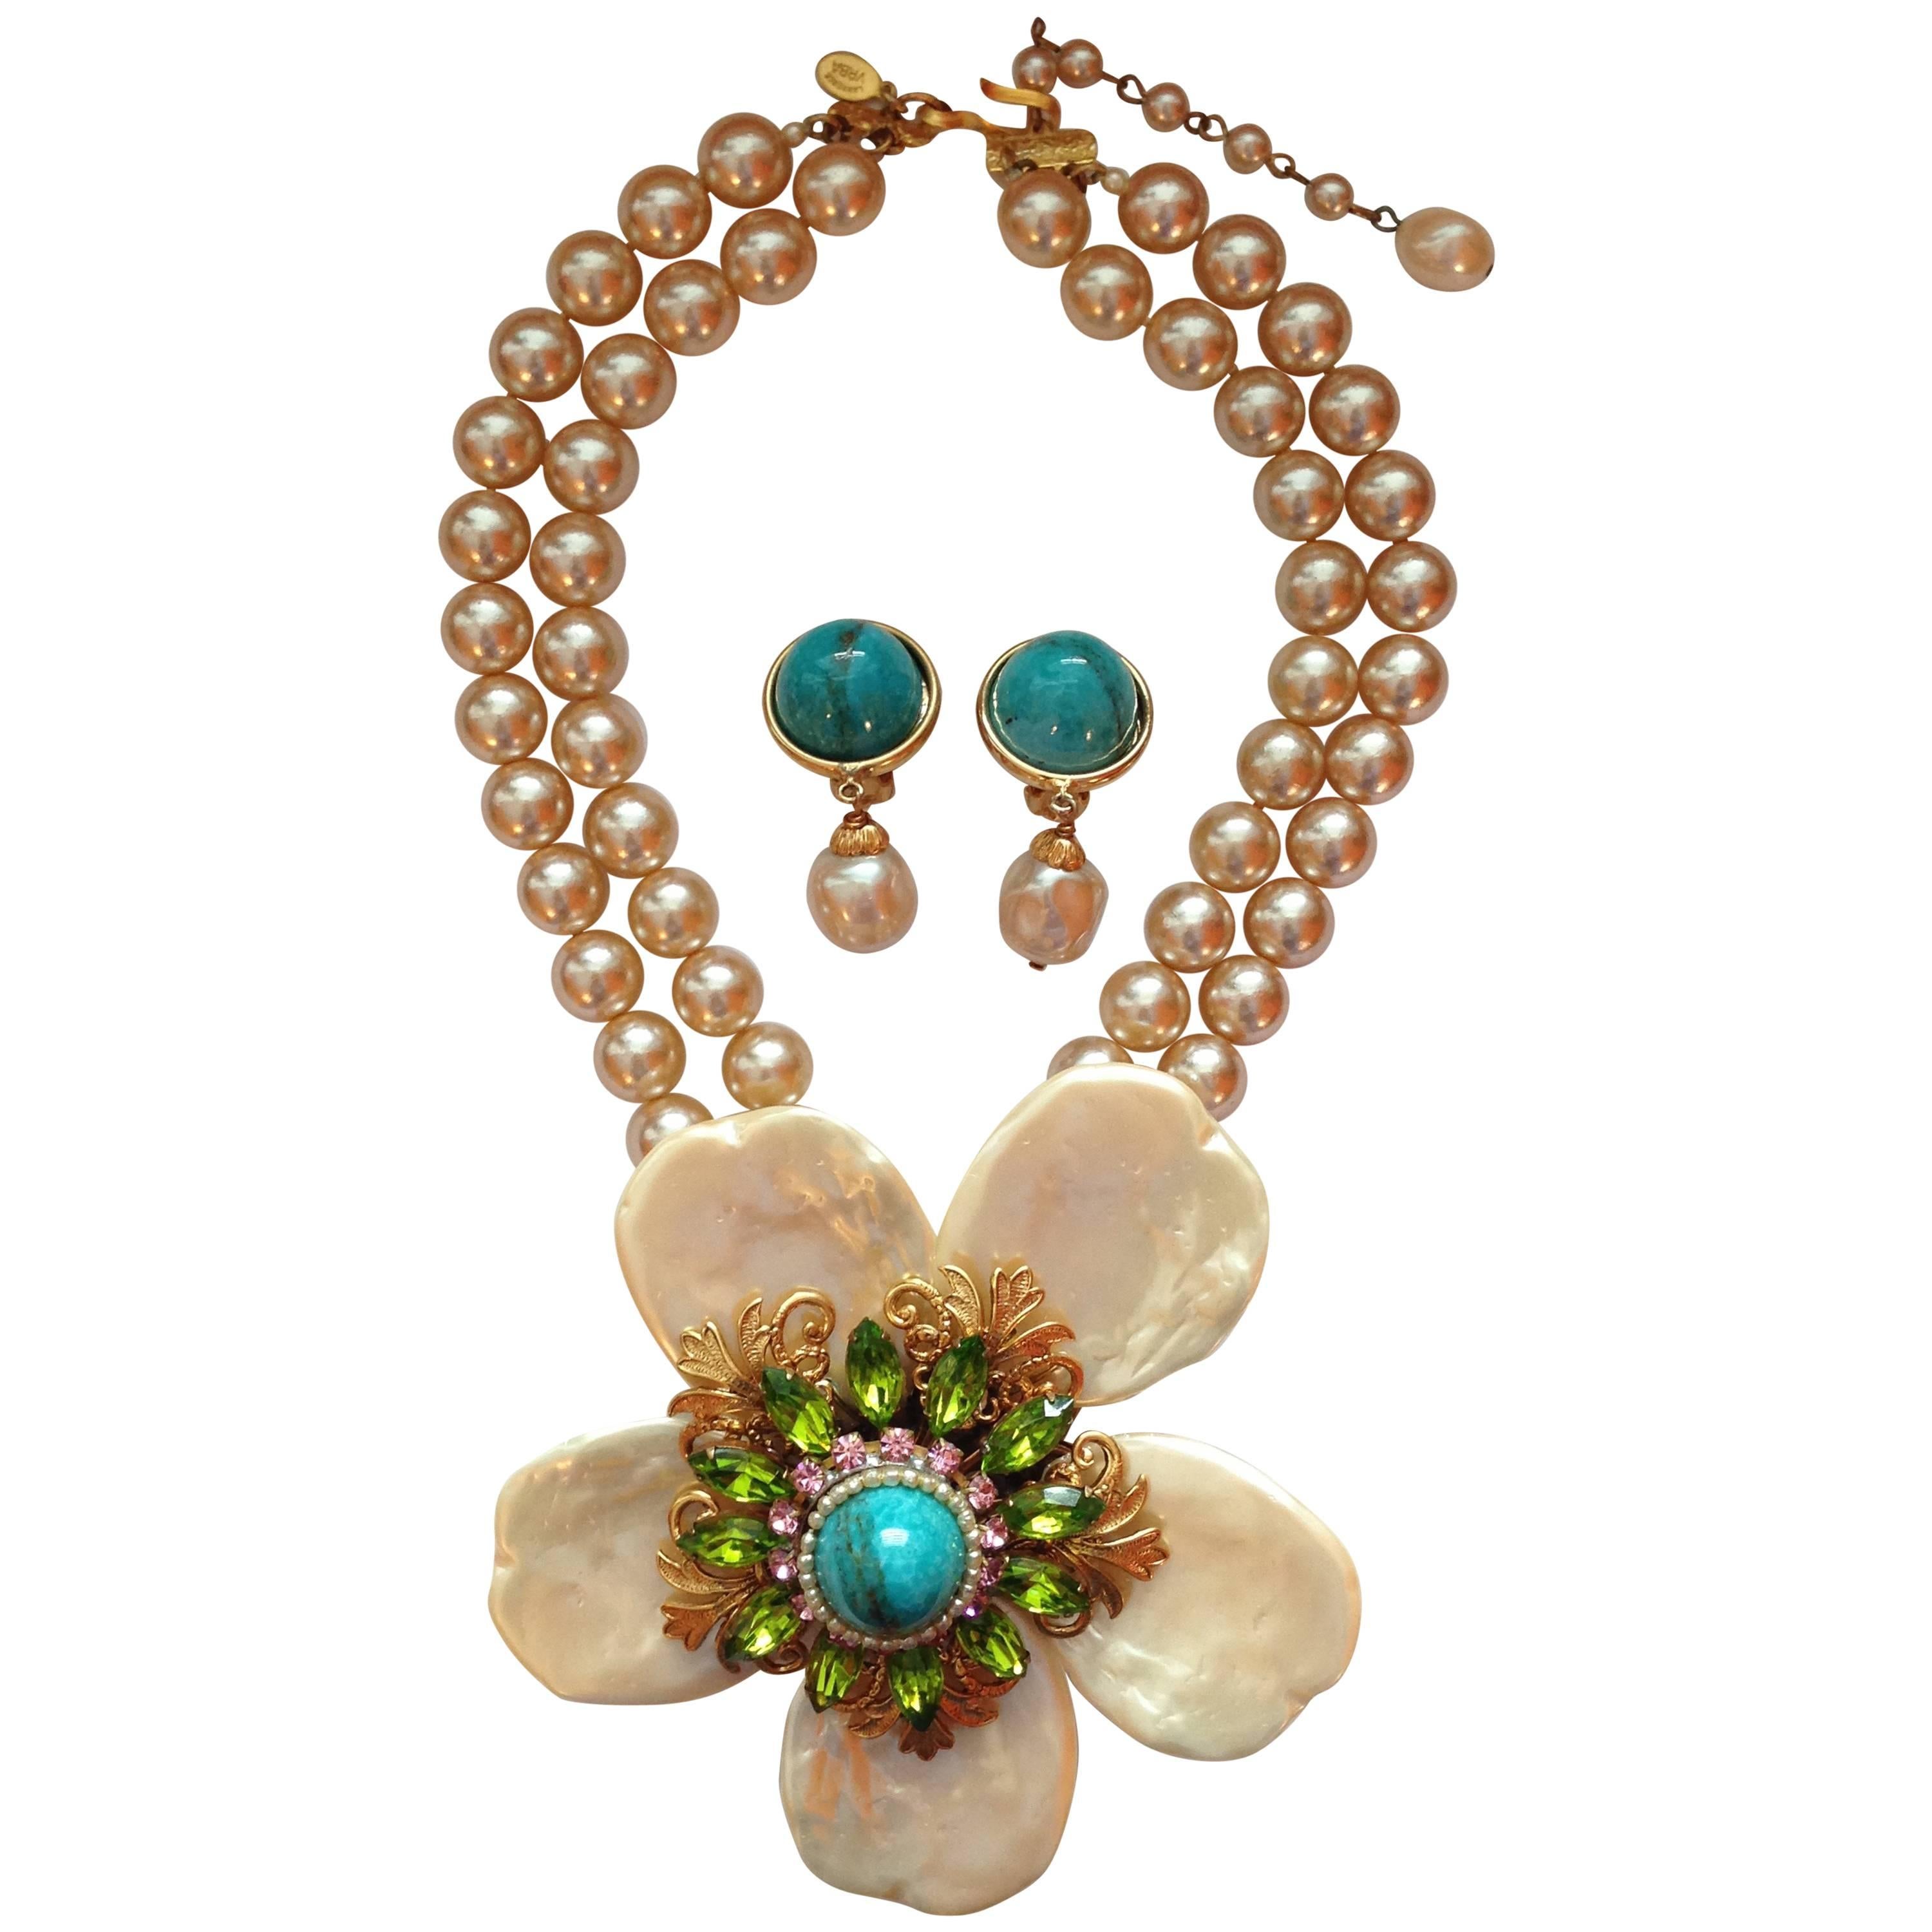 Lawrence Larry VRBA Flower Necklace and Clip-On Earrings  For Sale